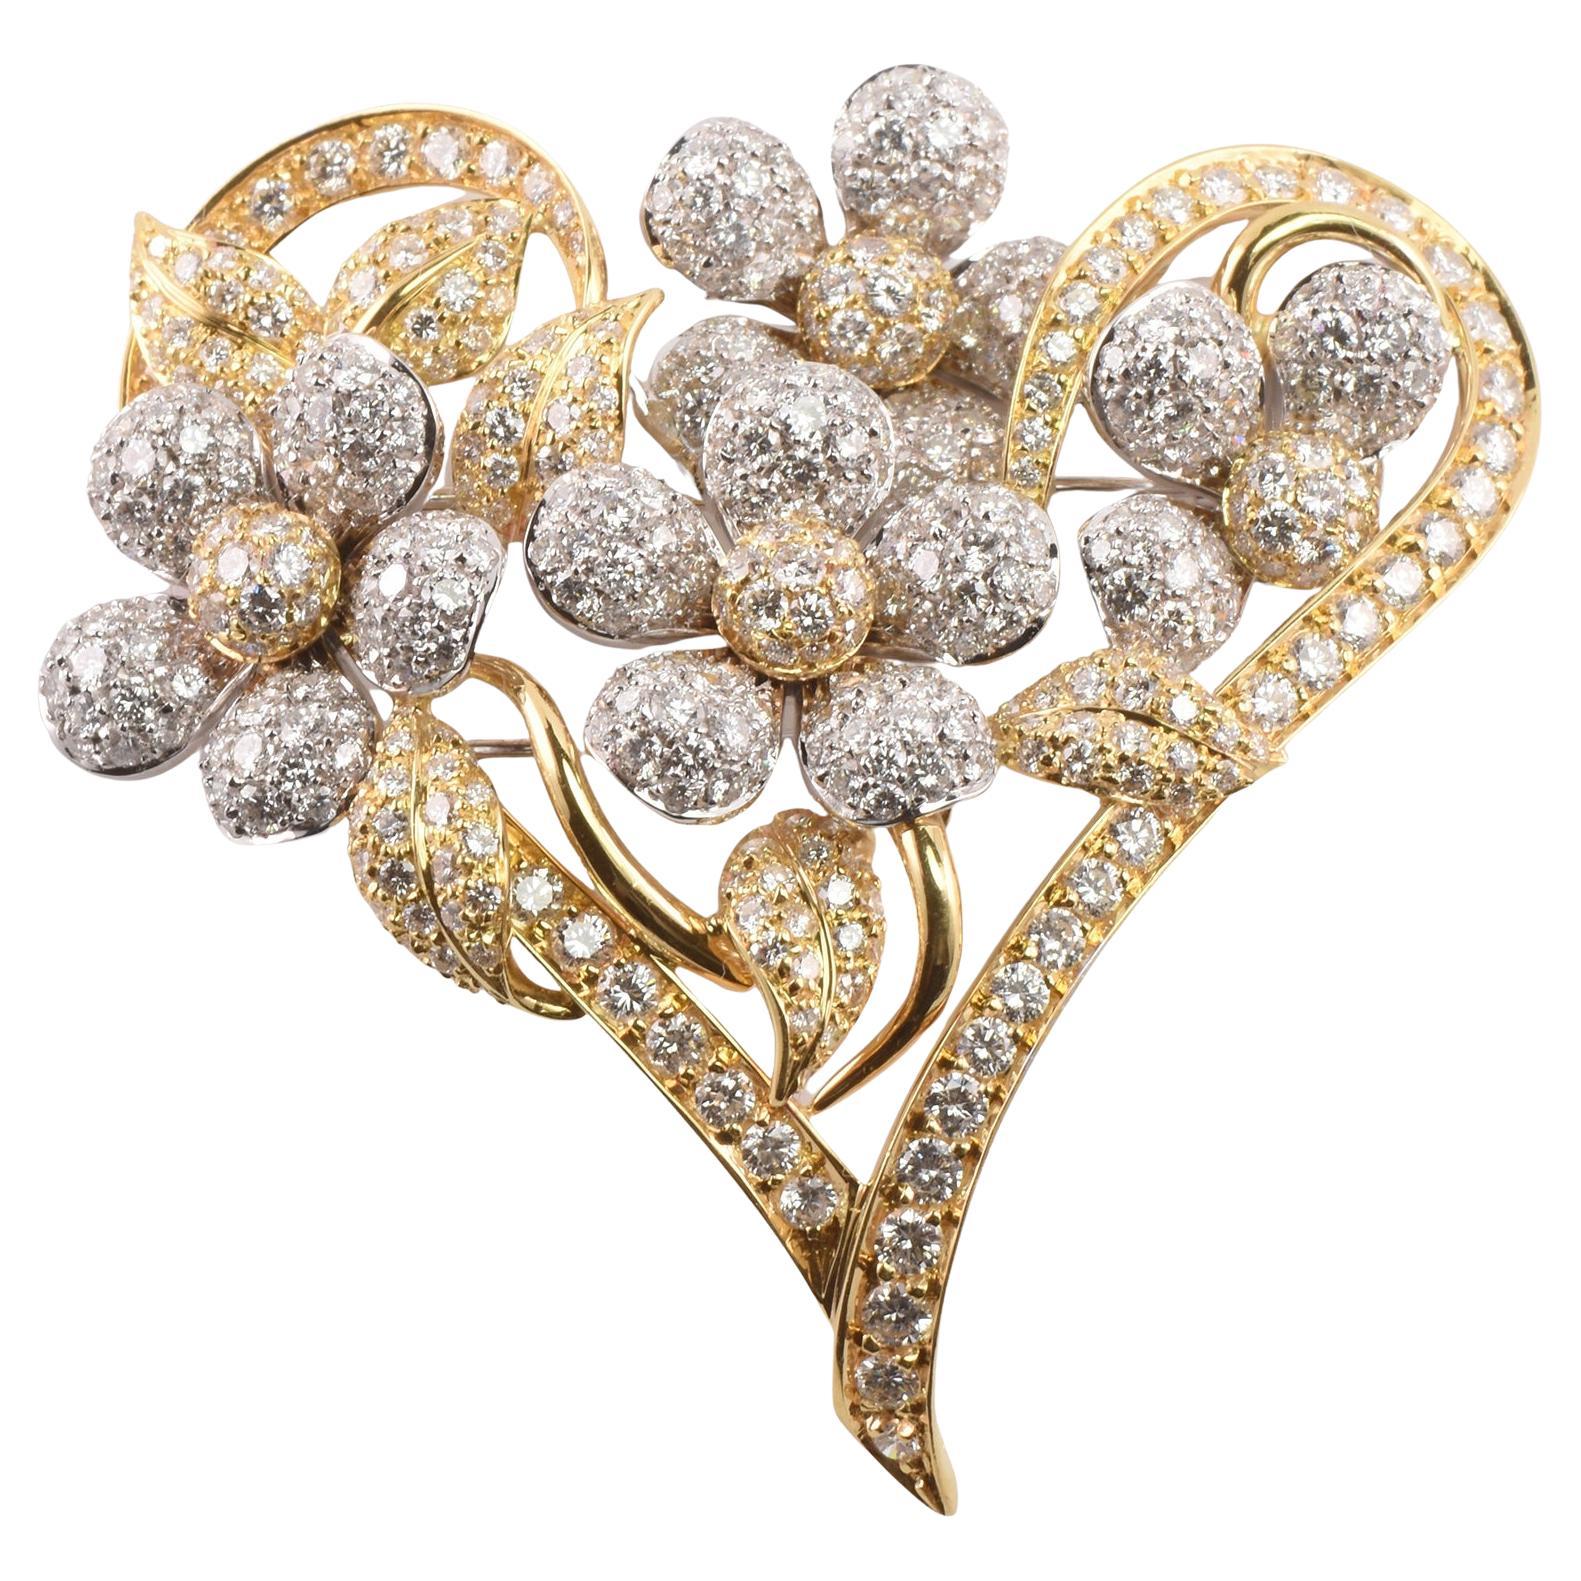 Chantecler of Capri, 18ct Yellow and White, Gold Diamond Flower Brooch